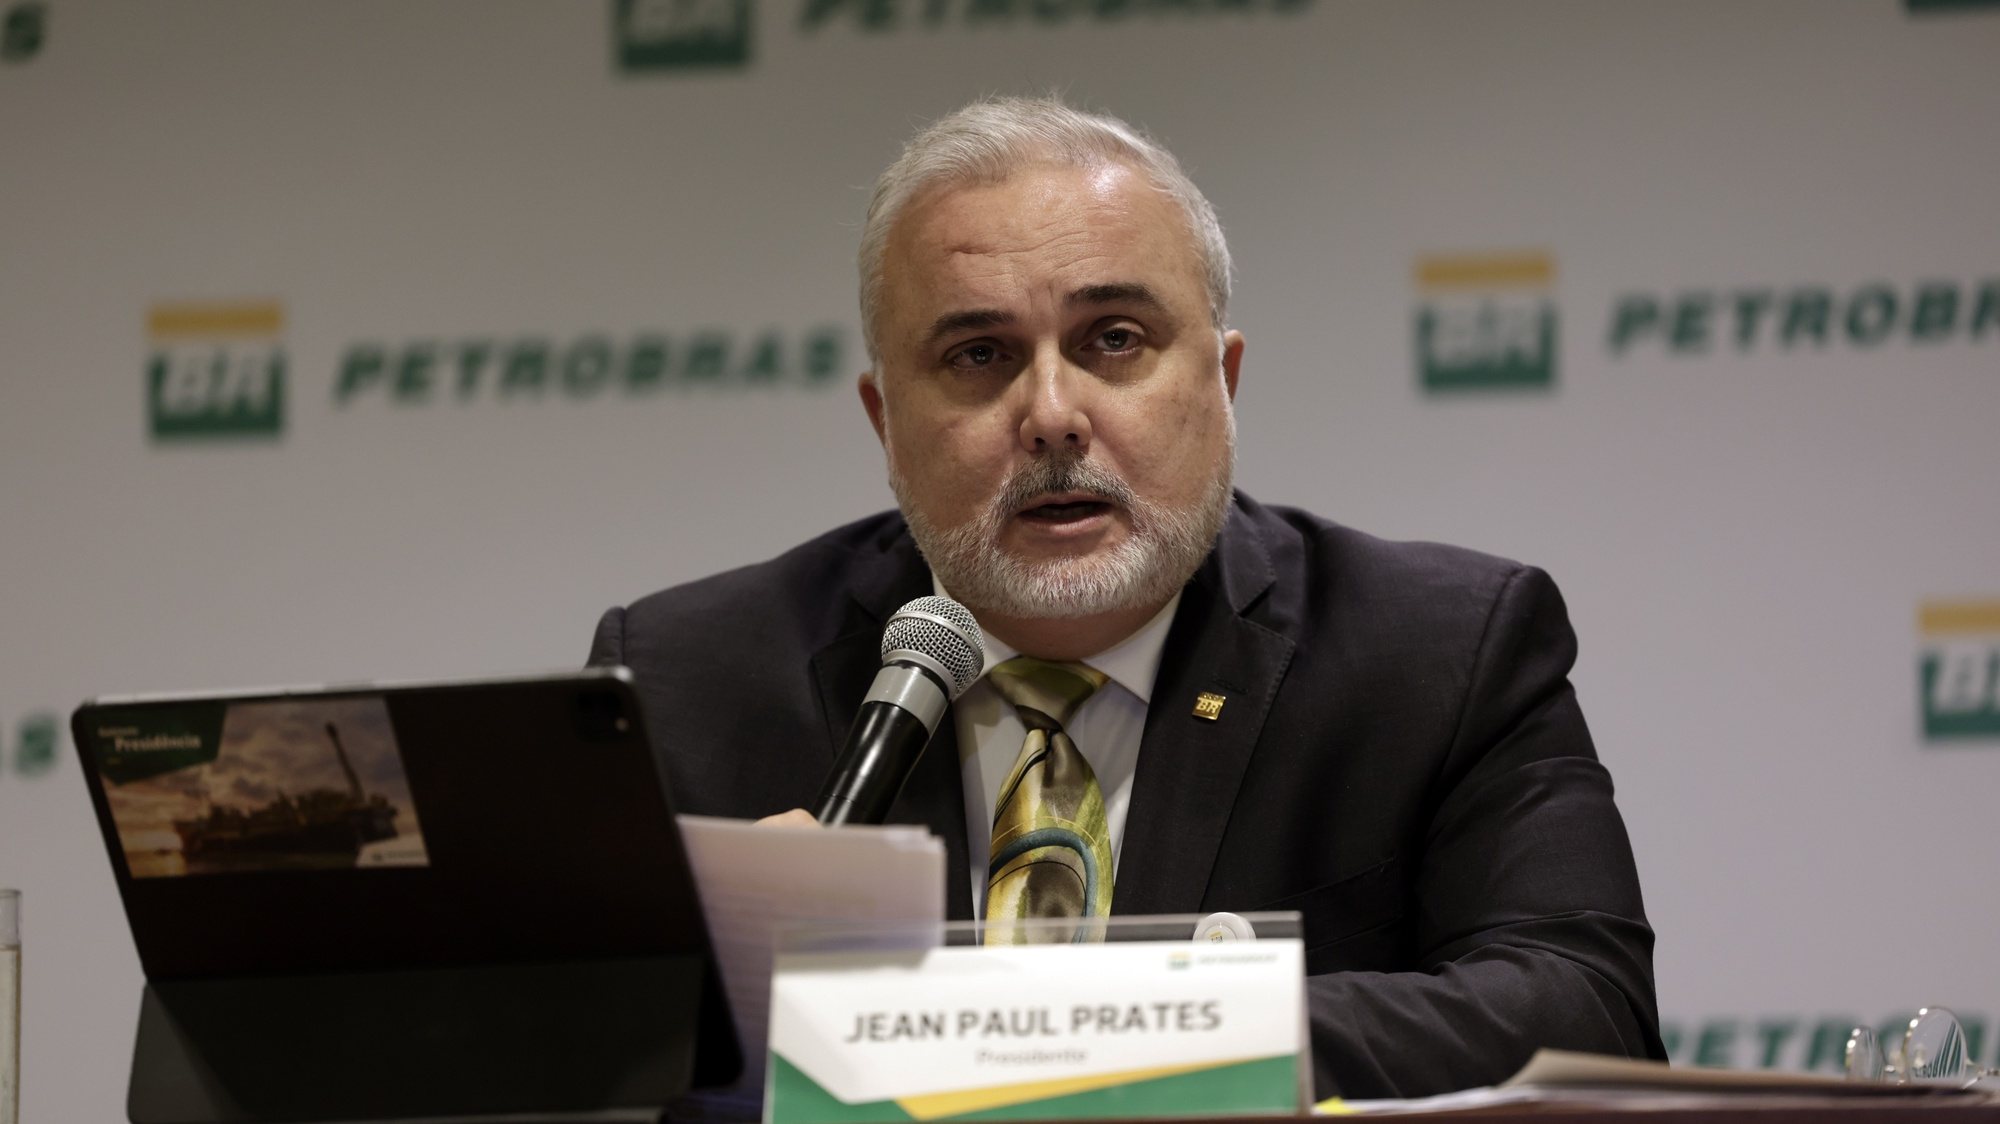 epa10499440 The president of the Petrobras company, Jean Paul Prates, participates in a press conference on the company&#039;s financial results, in Rio de Janeiro, Brazil, 02 March 2023. Petrobras announced on 01 March a record profits of 188,328 million reais (about 36,286 million dollars) for 2022.  EPA/Antonio Lacerda